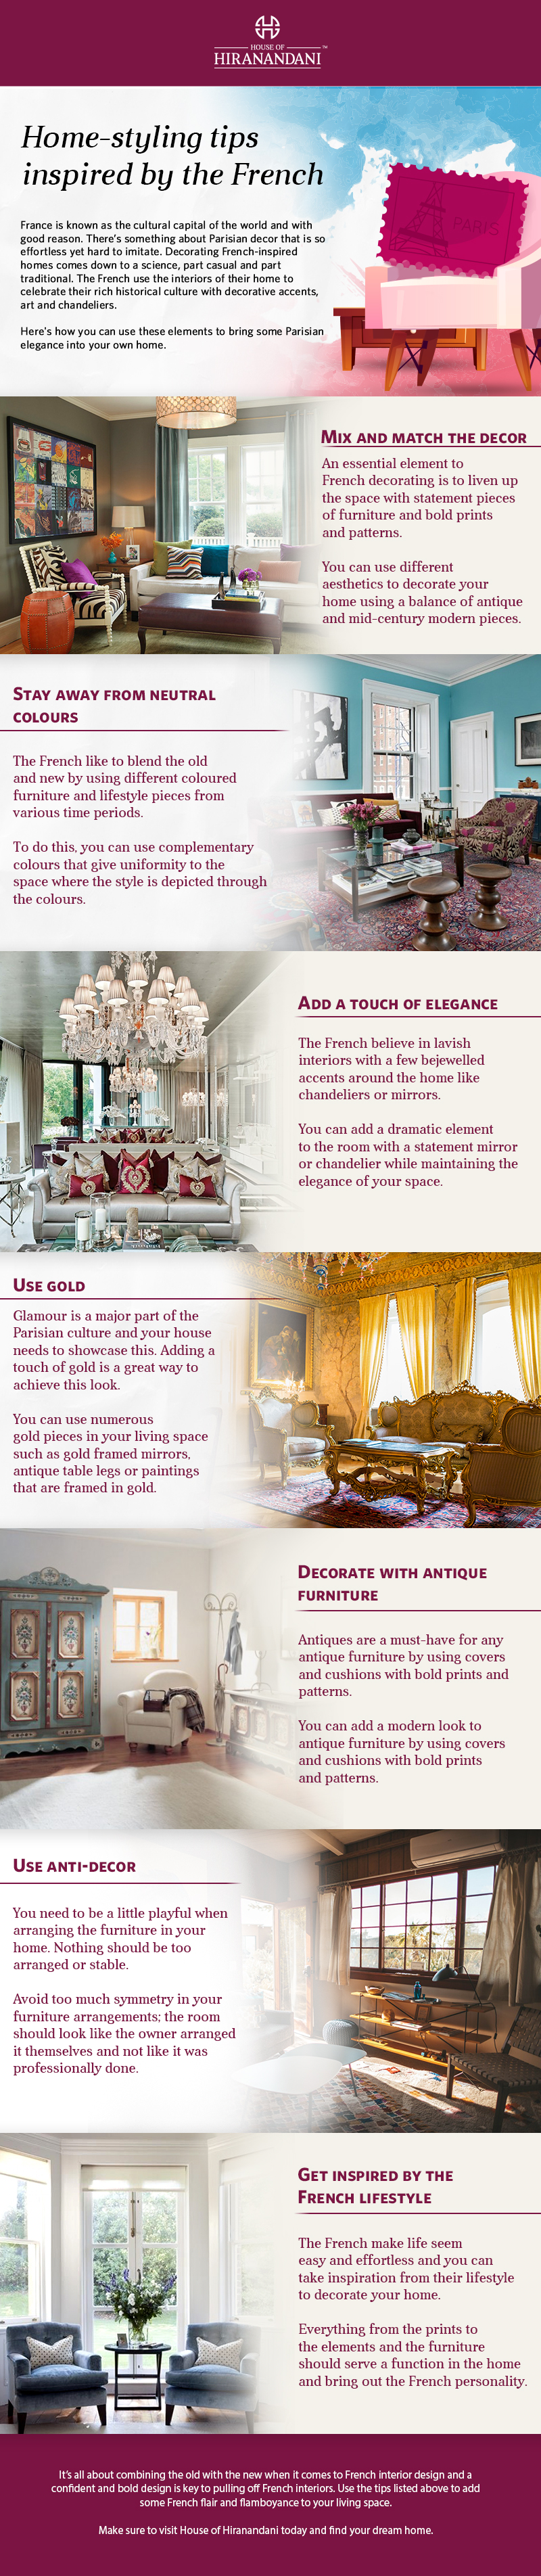 Home-styling tips inspired by the French